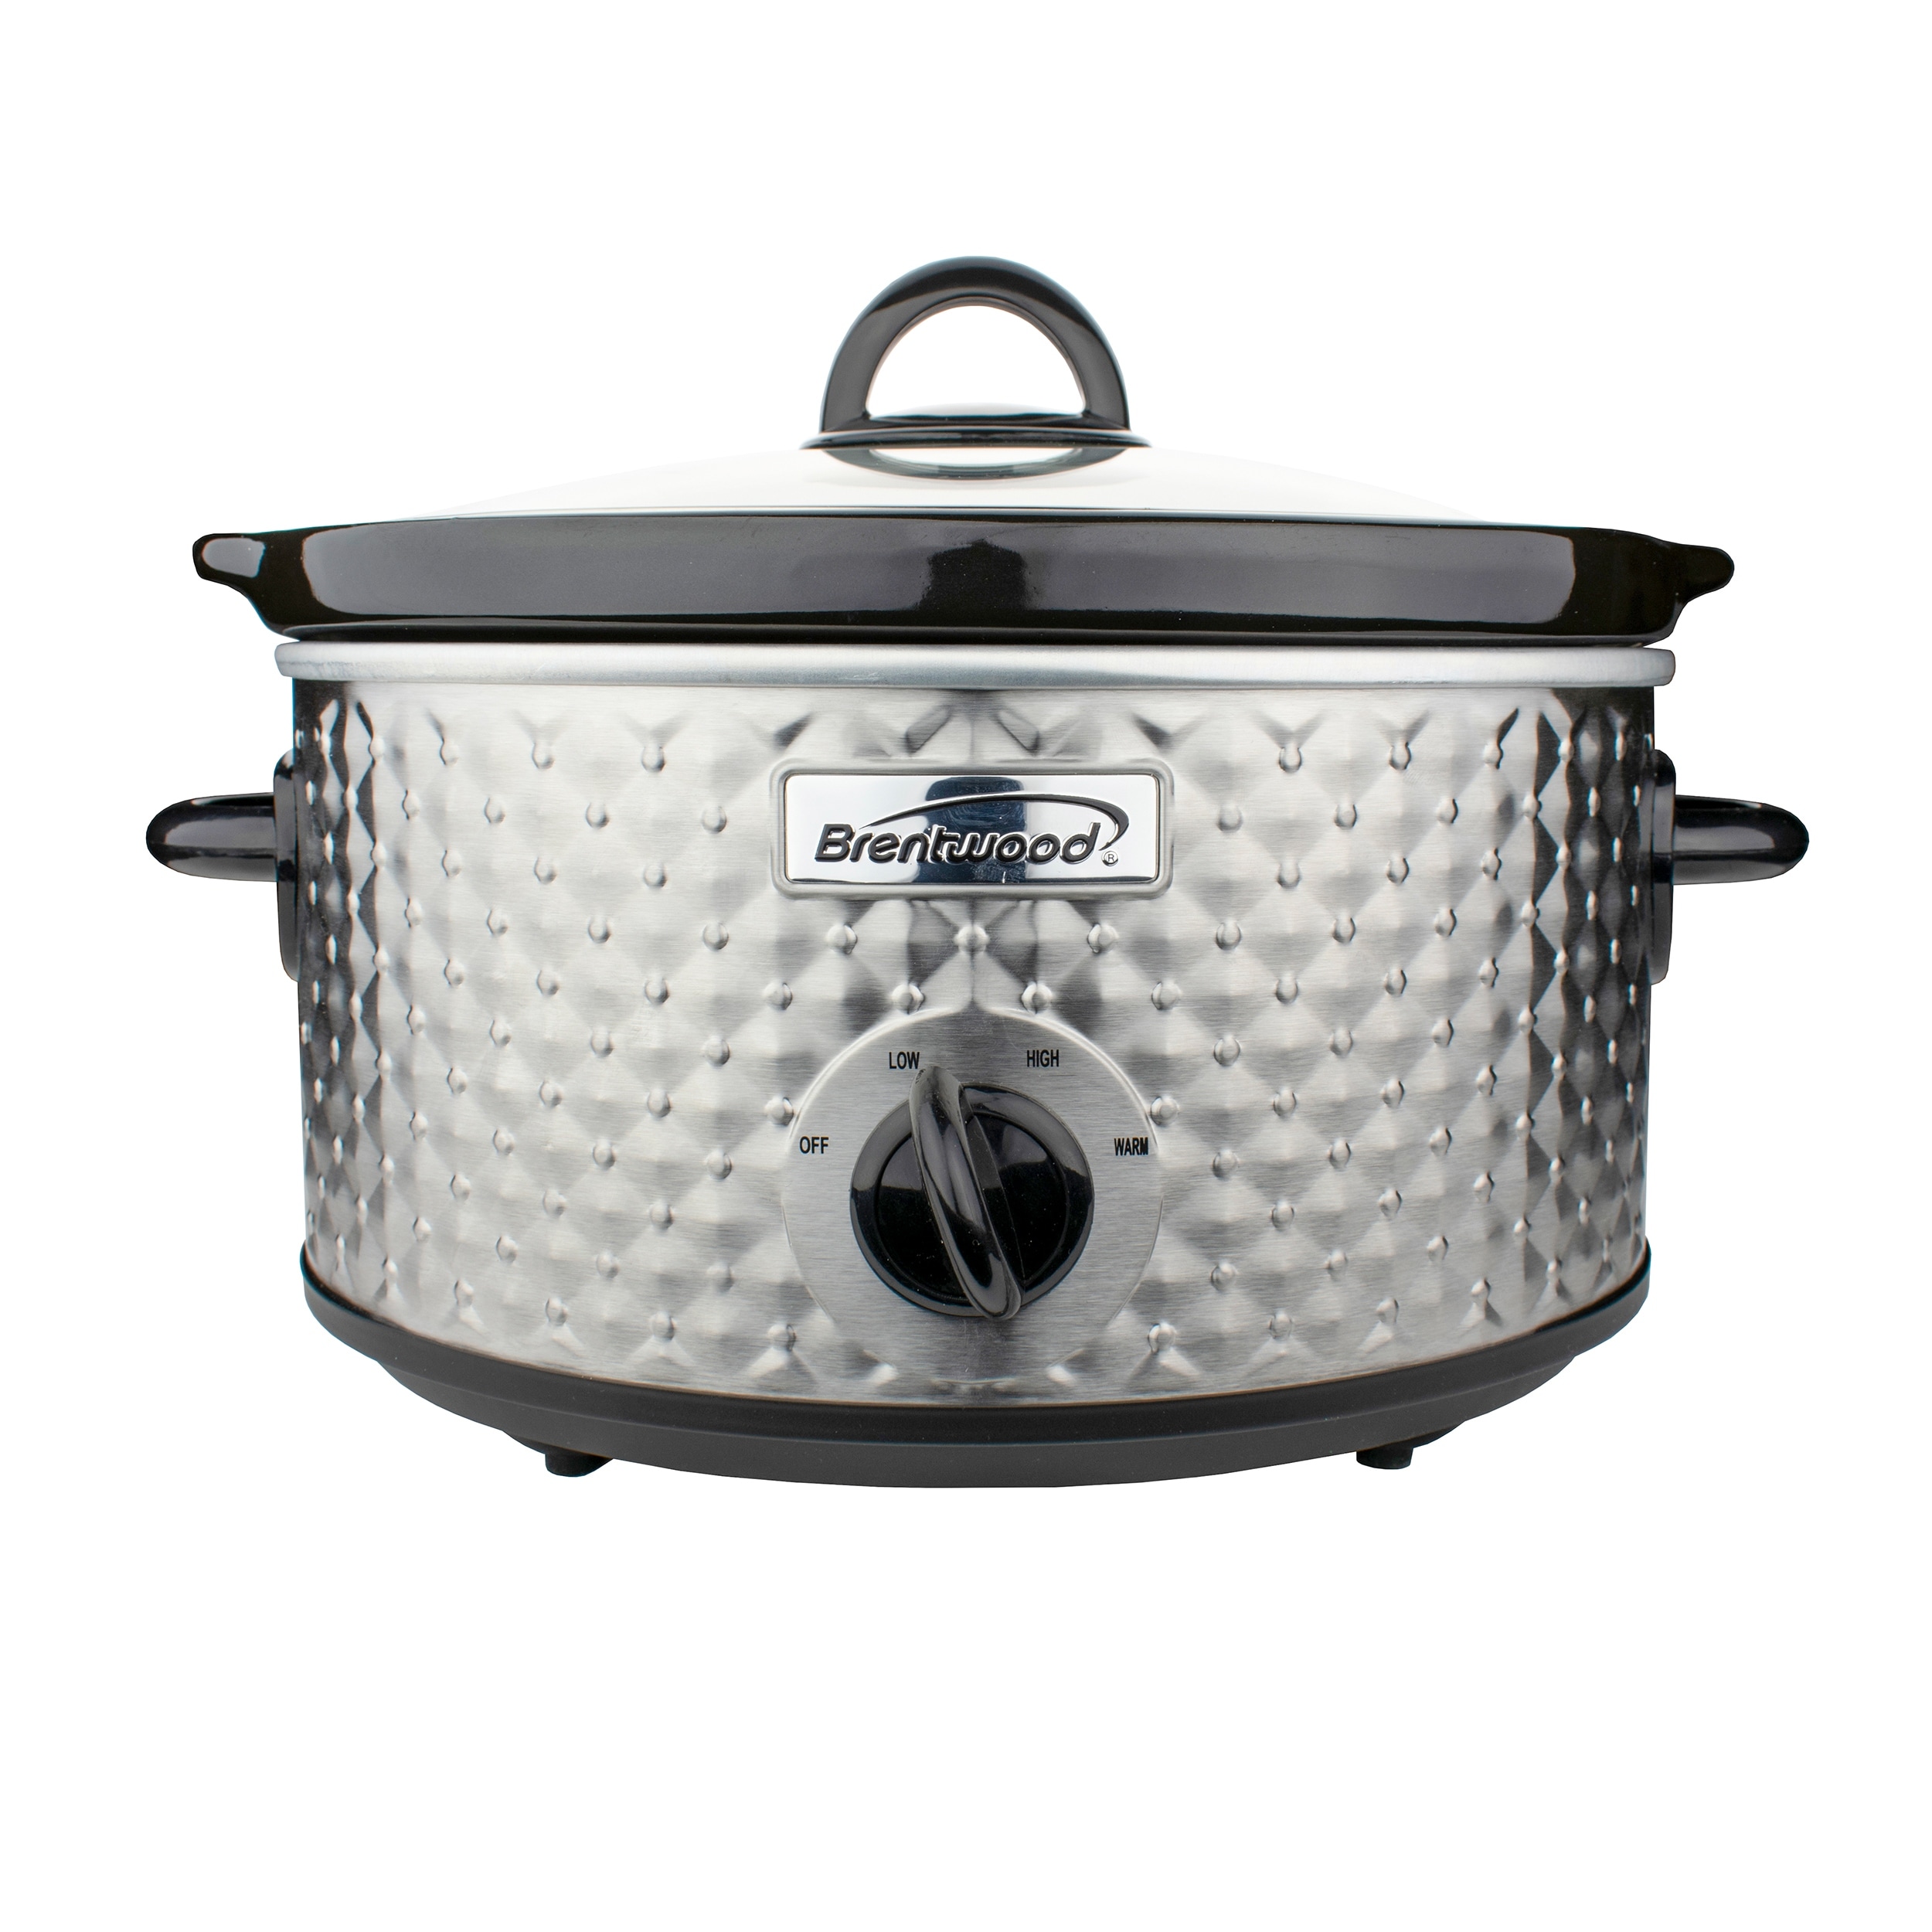 Brentwood 3 Quart Slow Cooker in White